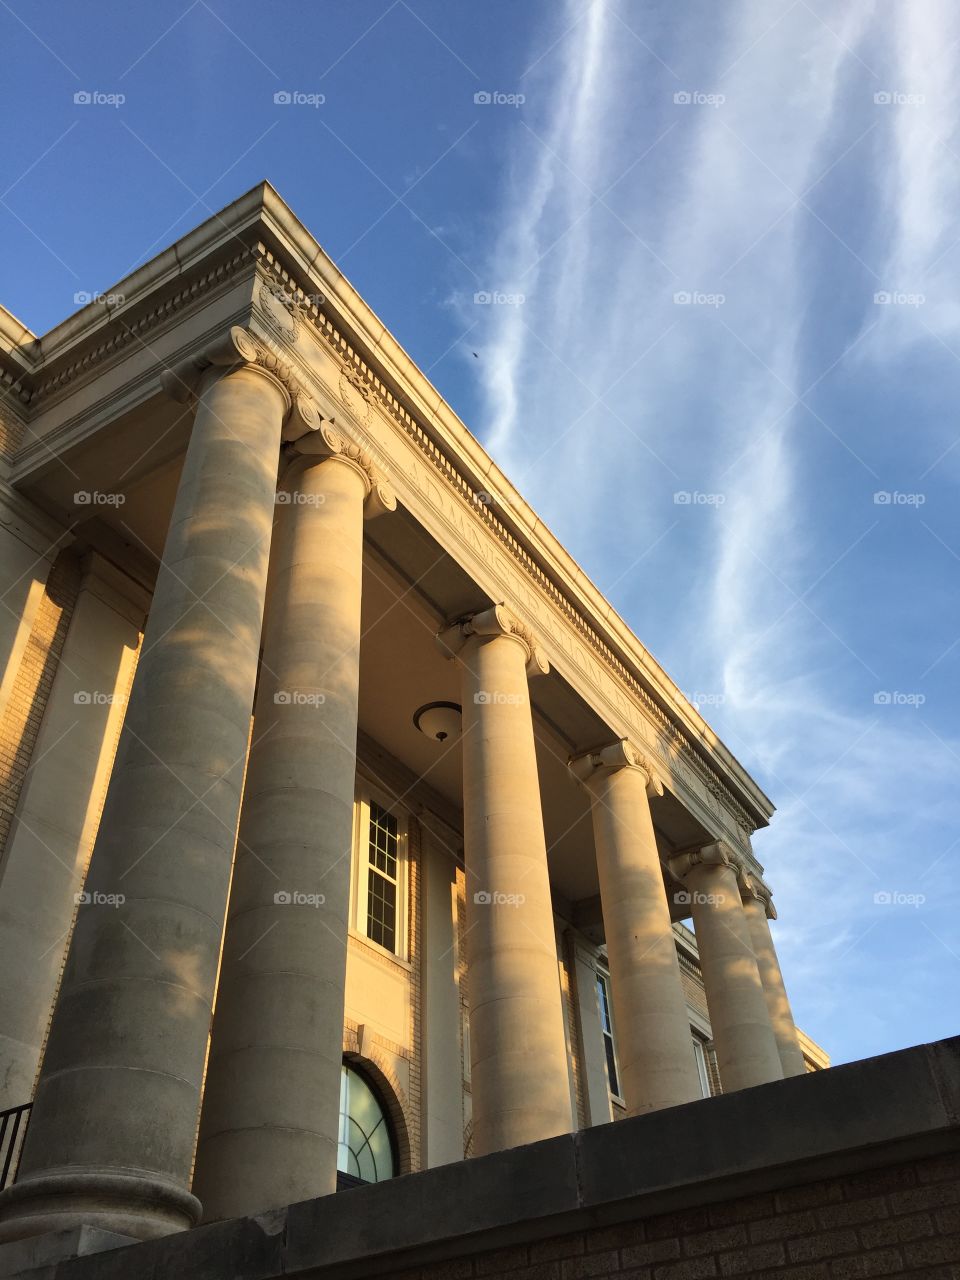 Columns by evening light . The Hardin Administration Building, built in 1929, on the campus of Abilene Christian University. 